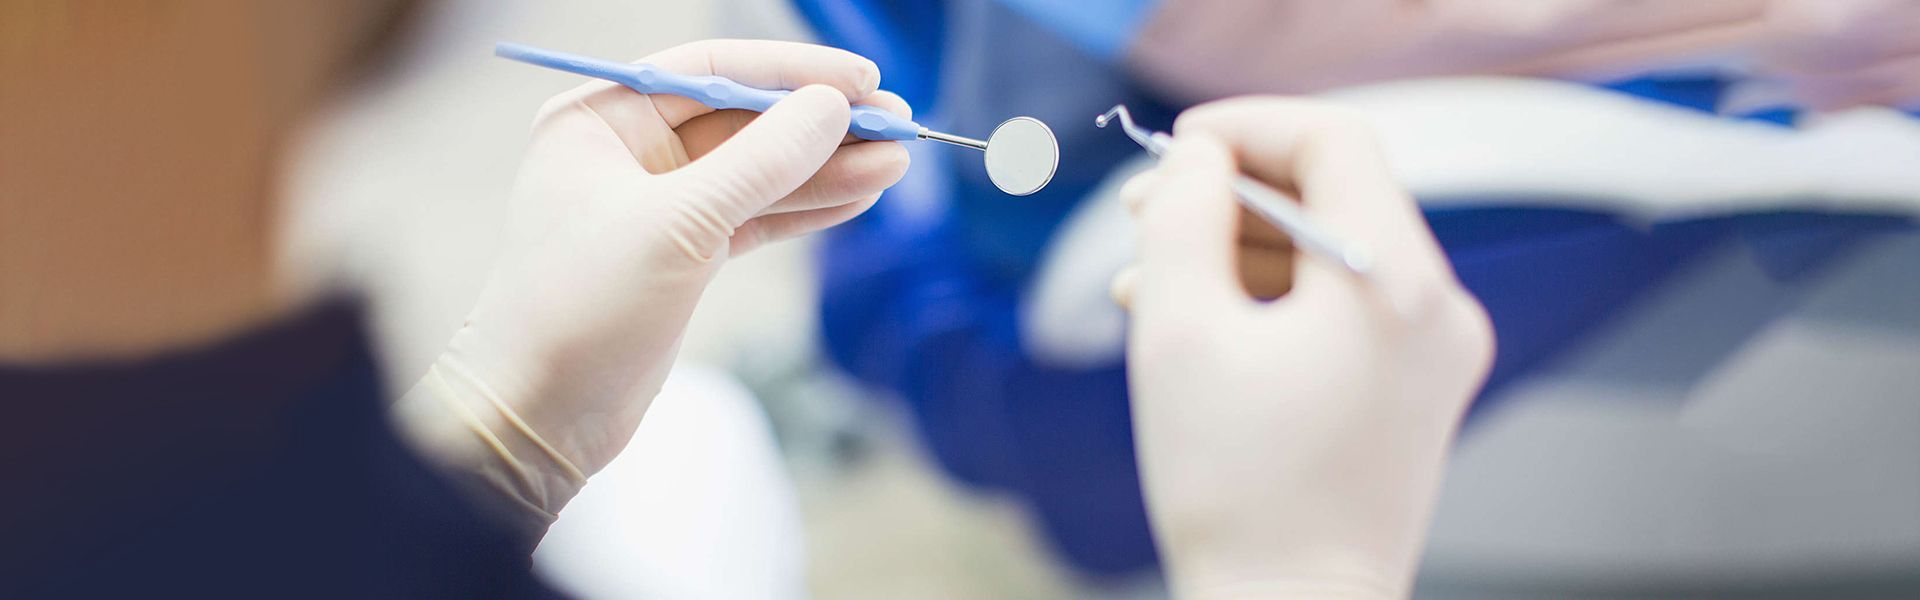 Root Canal Procedures: Here’s All You Need to Know